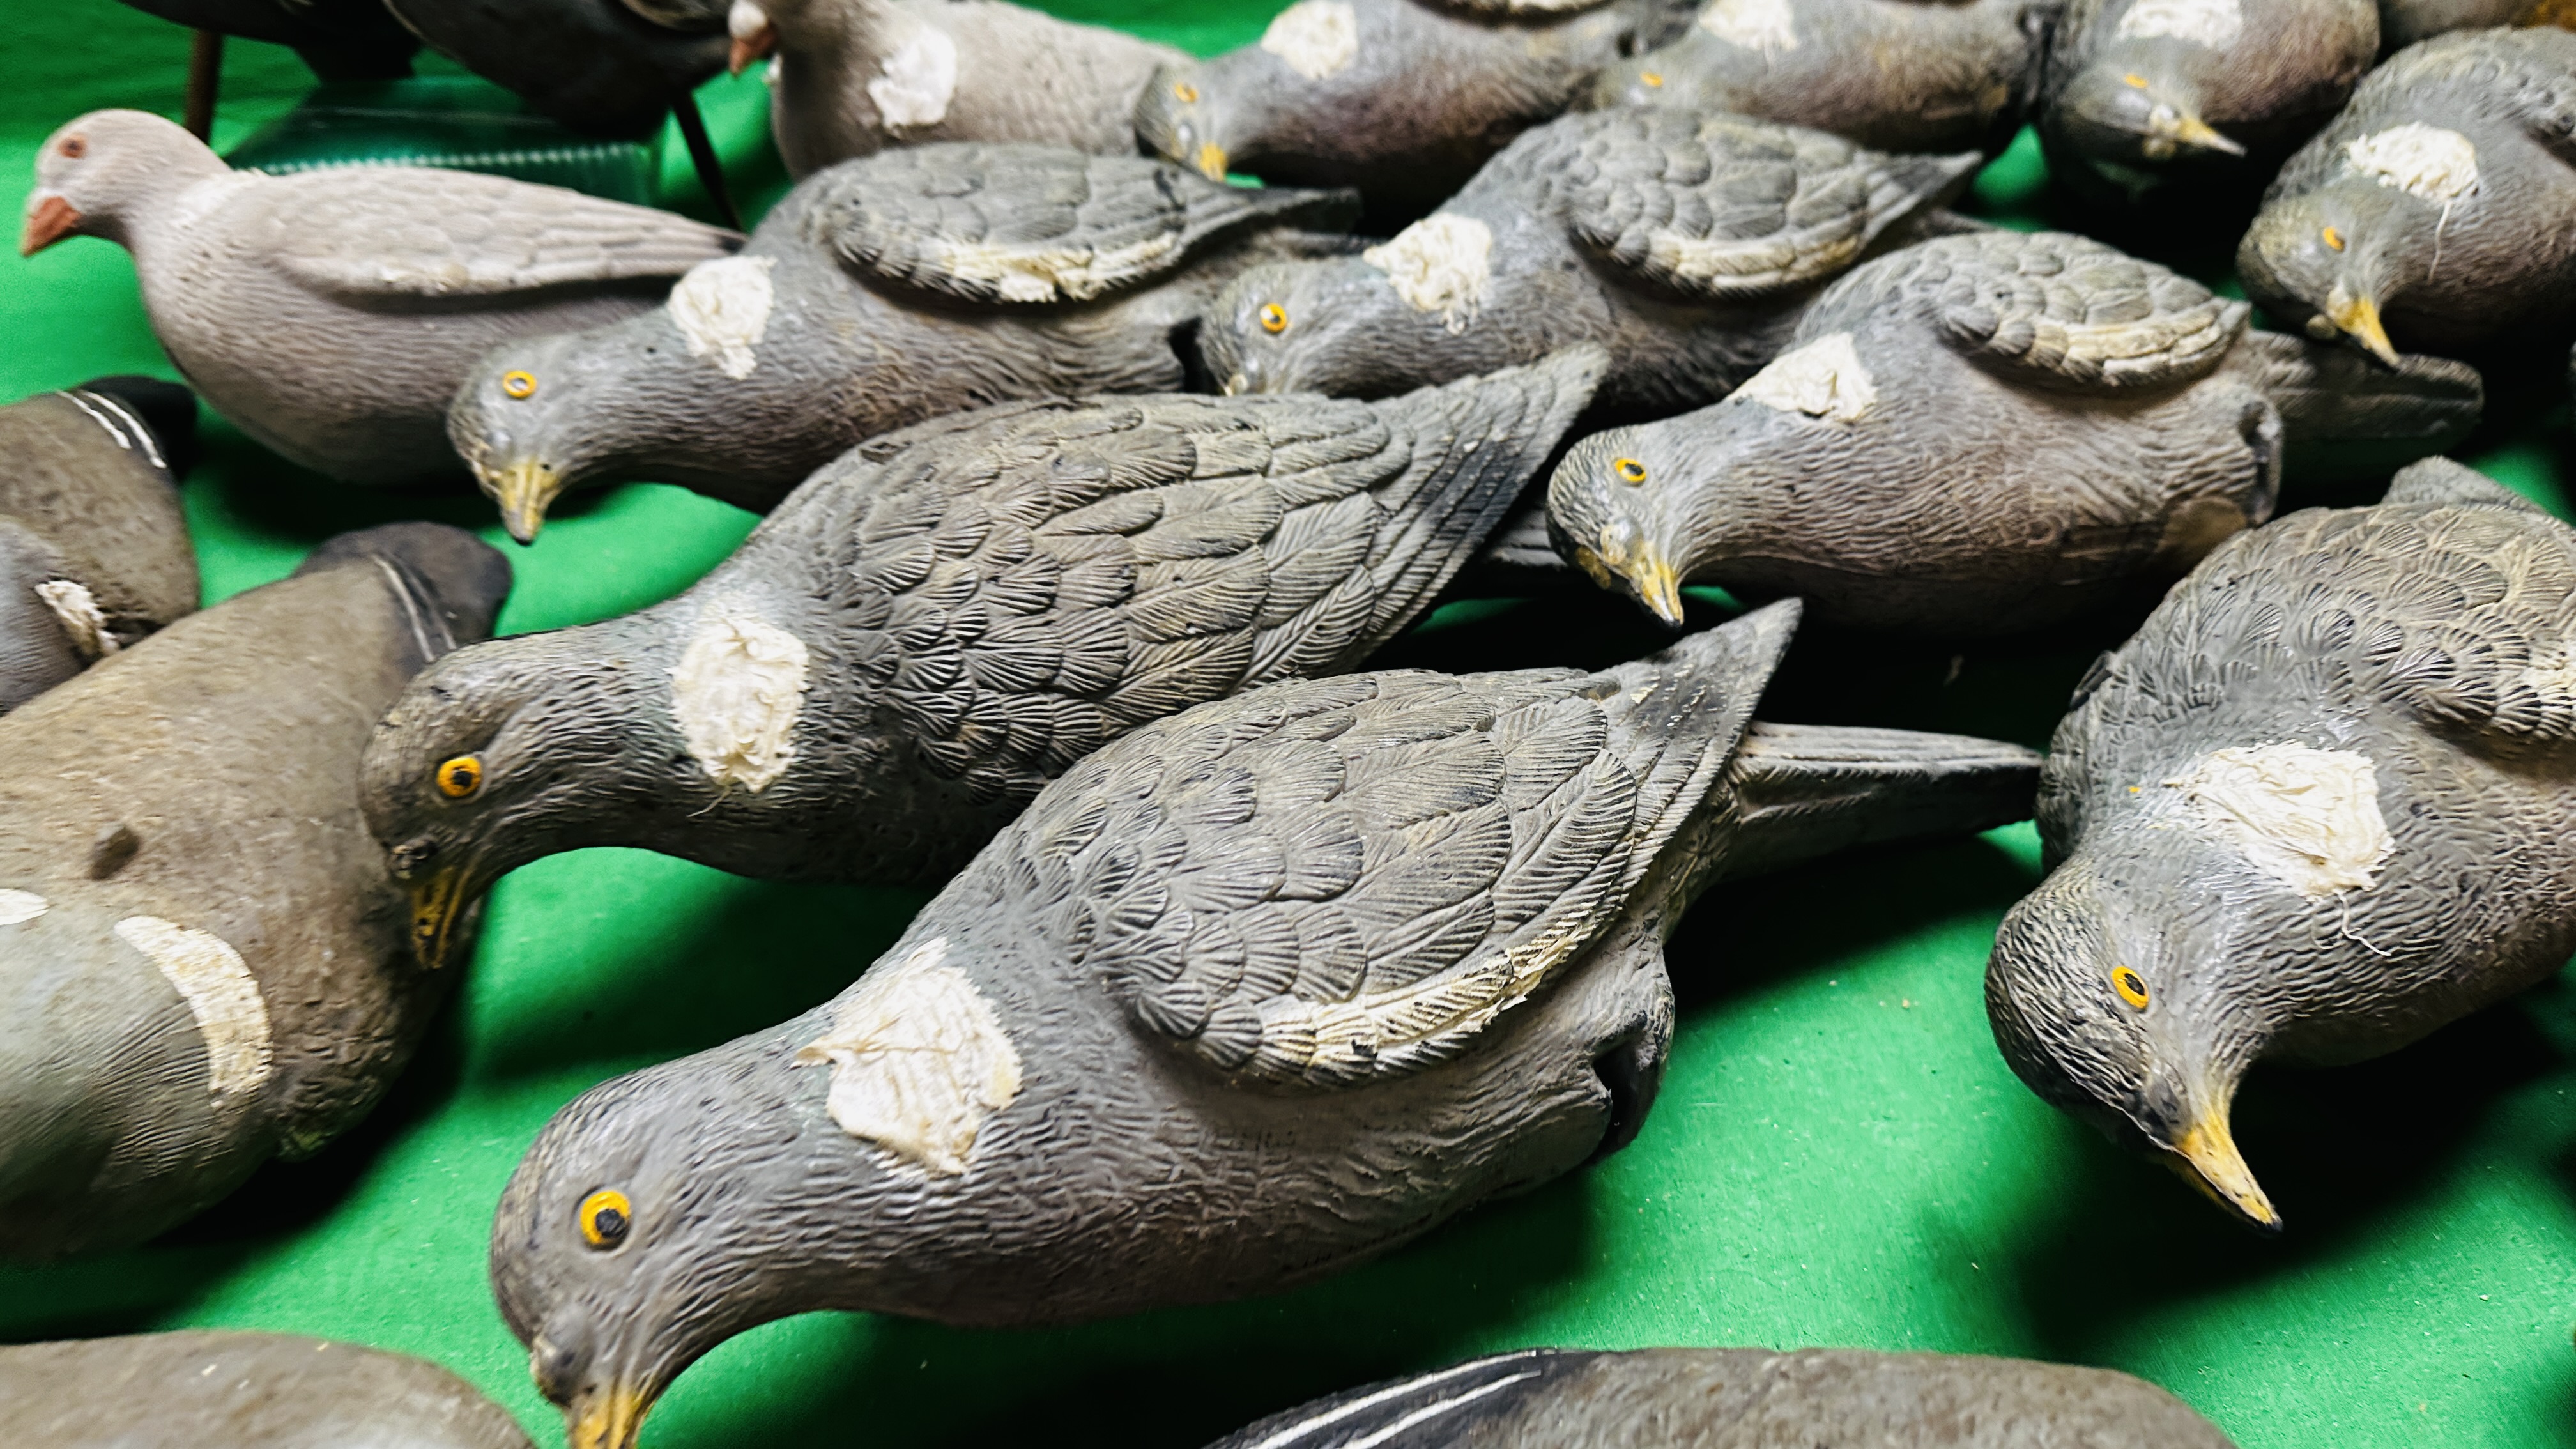 A GROUP OF 26 PIGEON DECOYS. - Image 3 of 10